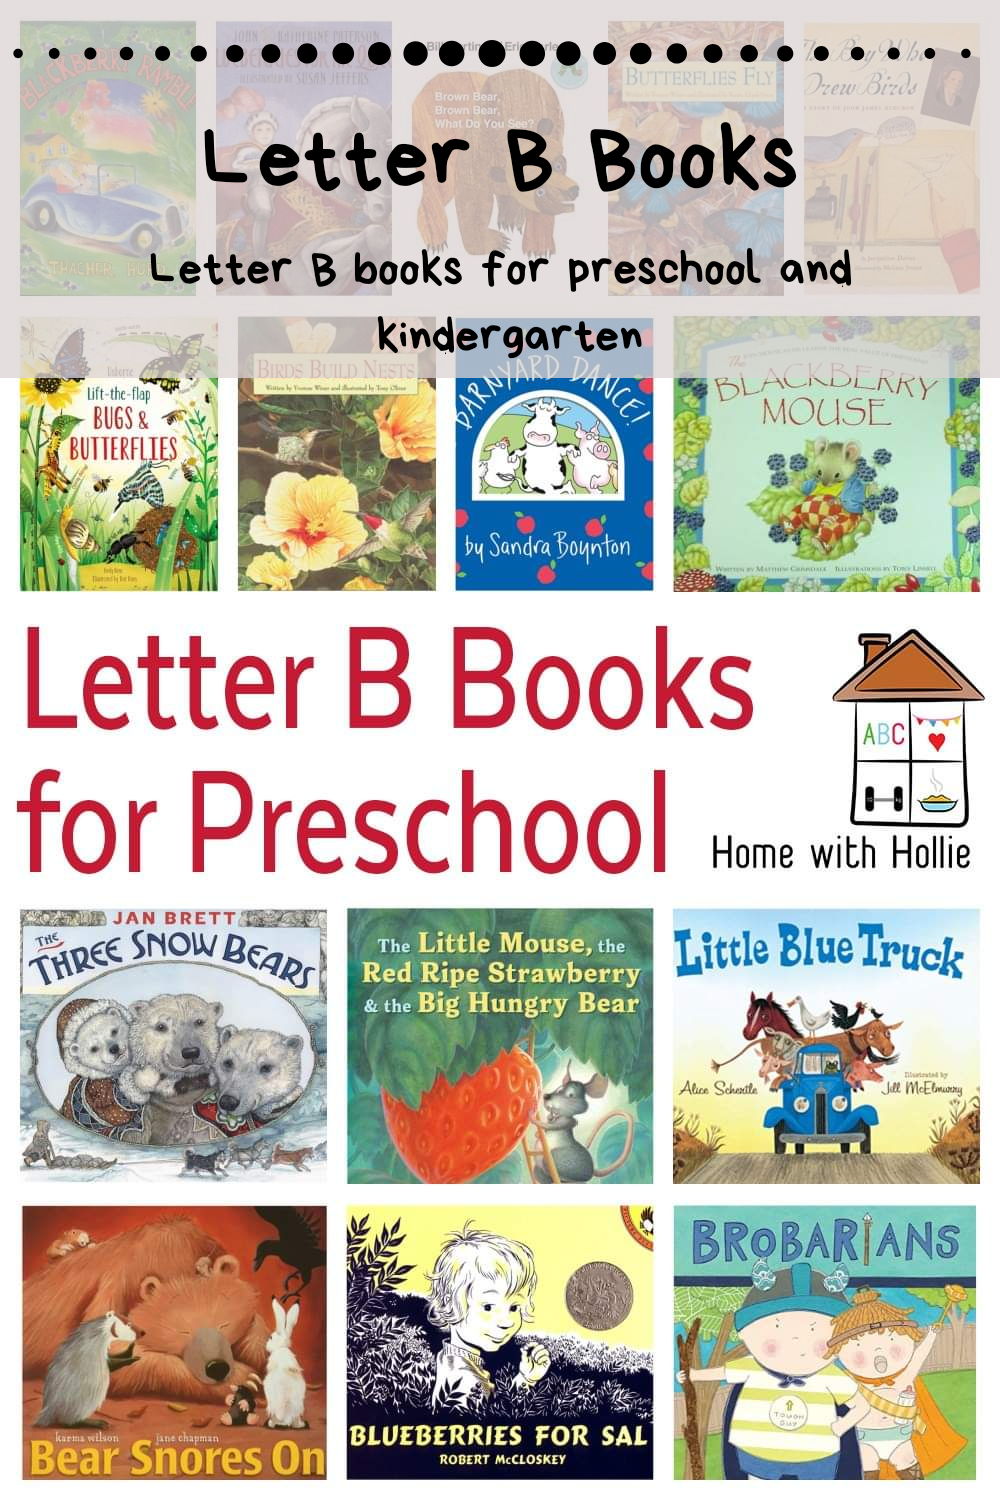 Letter B Books for Preschool - Home With Hollie